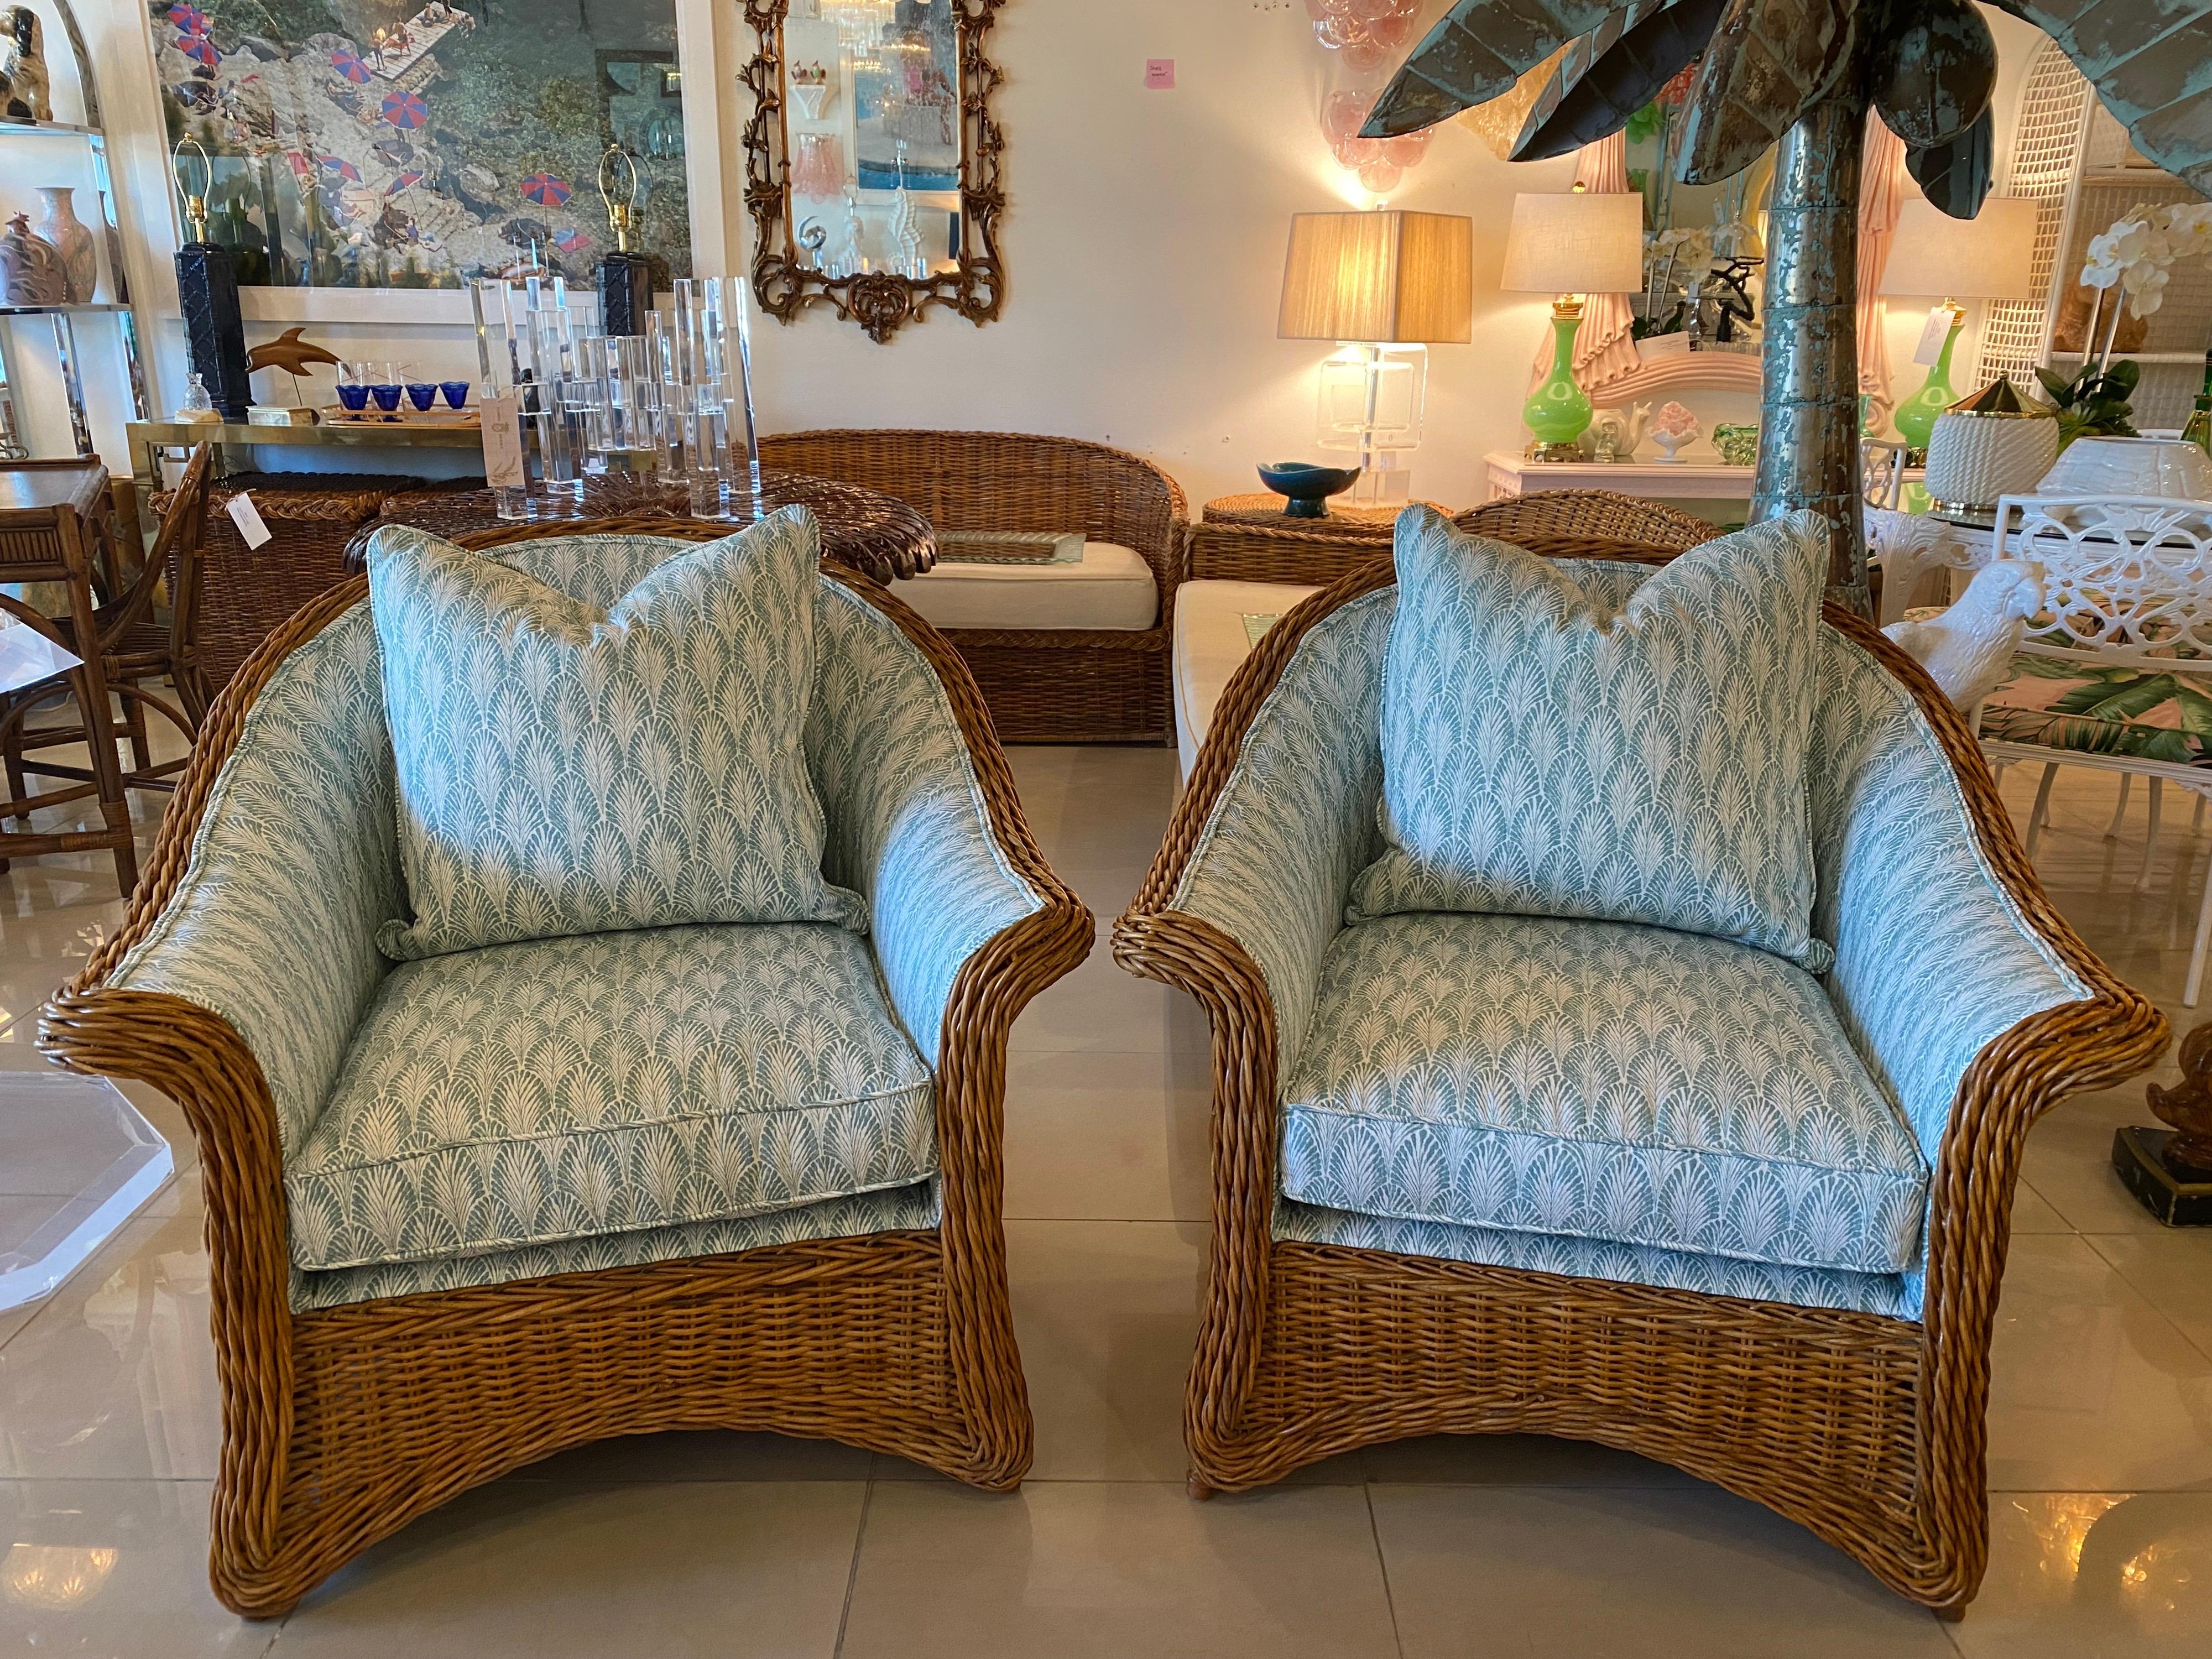 Beautiful pair of vintage rattan wicker woven armchairs, club, lounge chairs. These are very well made and very comfortable. Newly upholstered. Measures 34.5 H x 35.5 W x 32 Overall Depth x 17.5 Seat height.